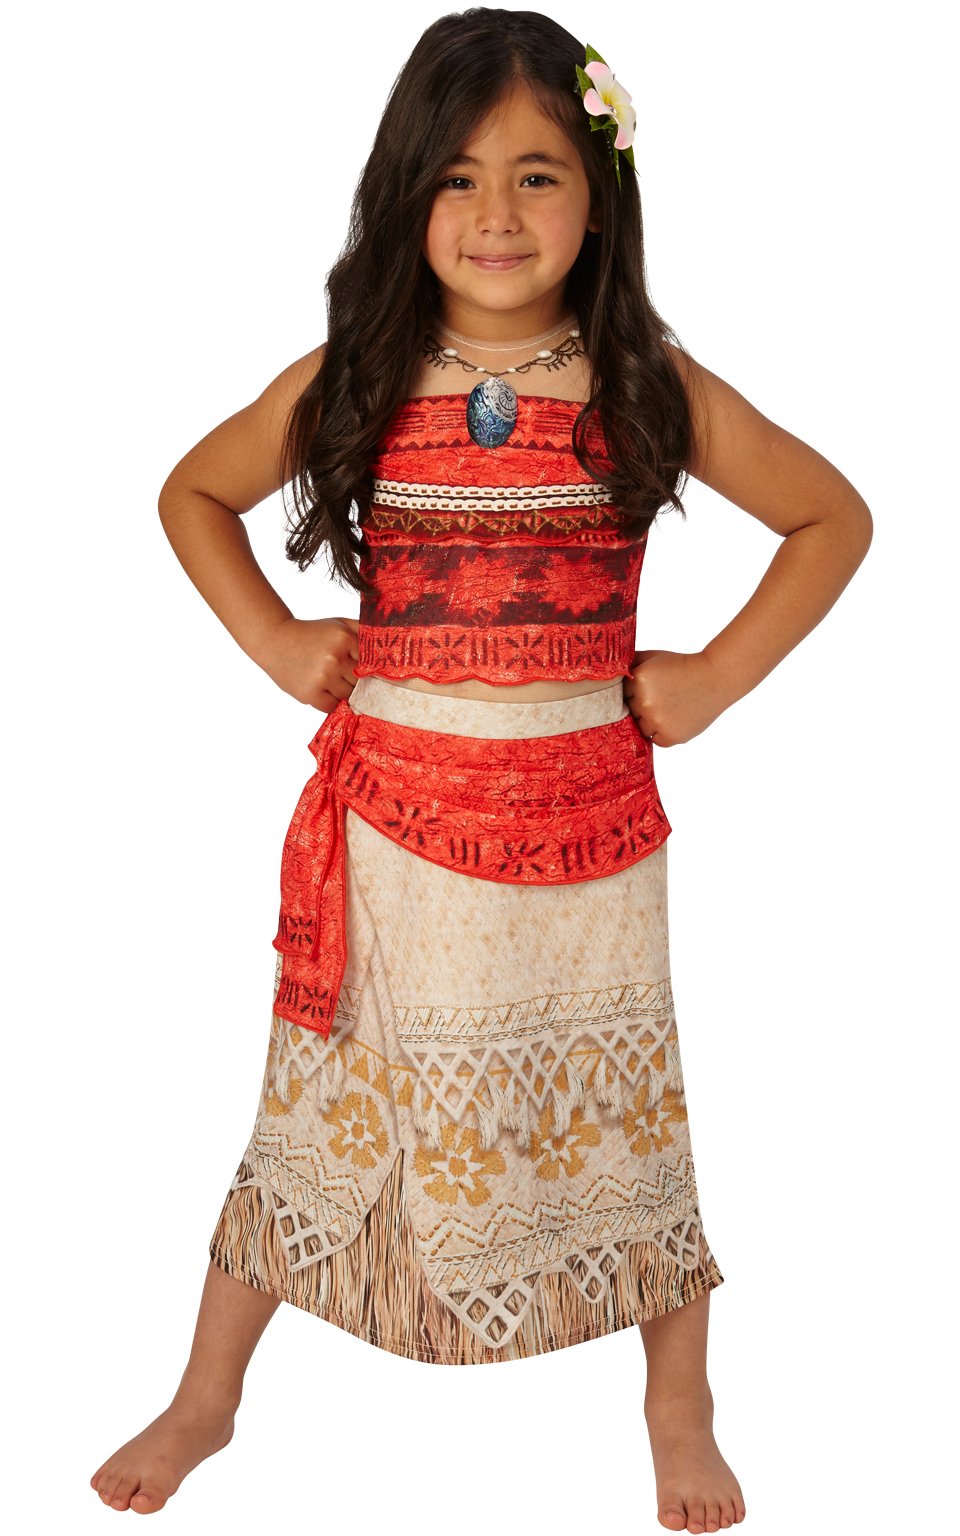 Click to view product details and reviews for Disney Moana Girls Costume Small Age 3 4.